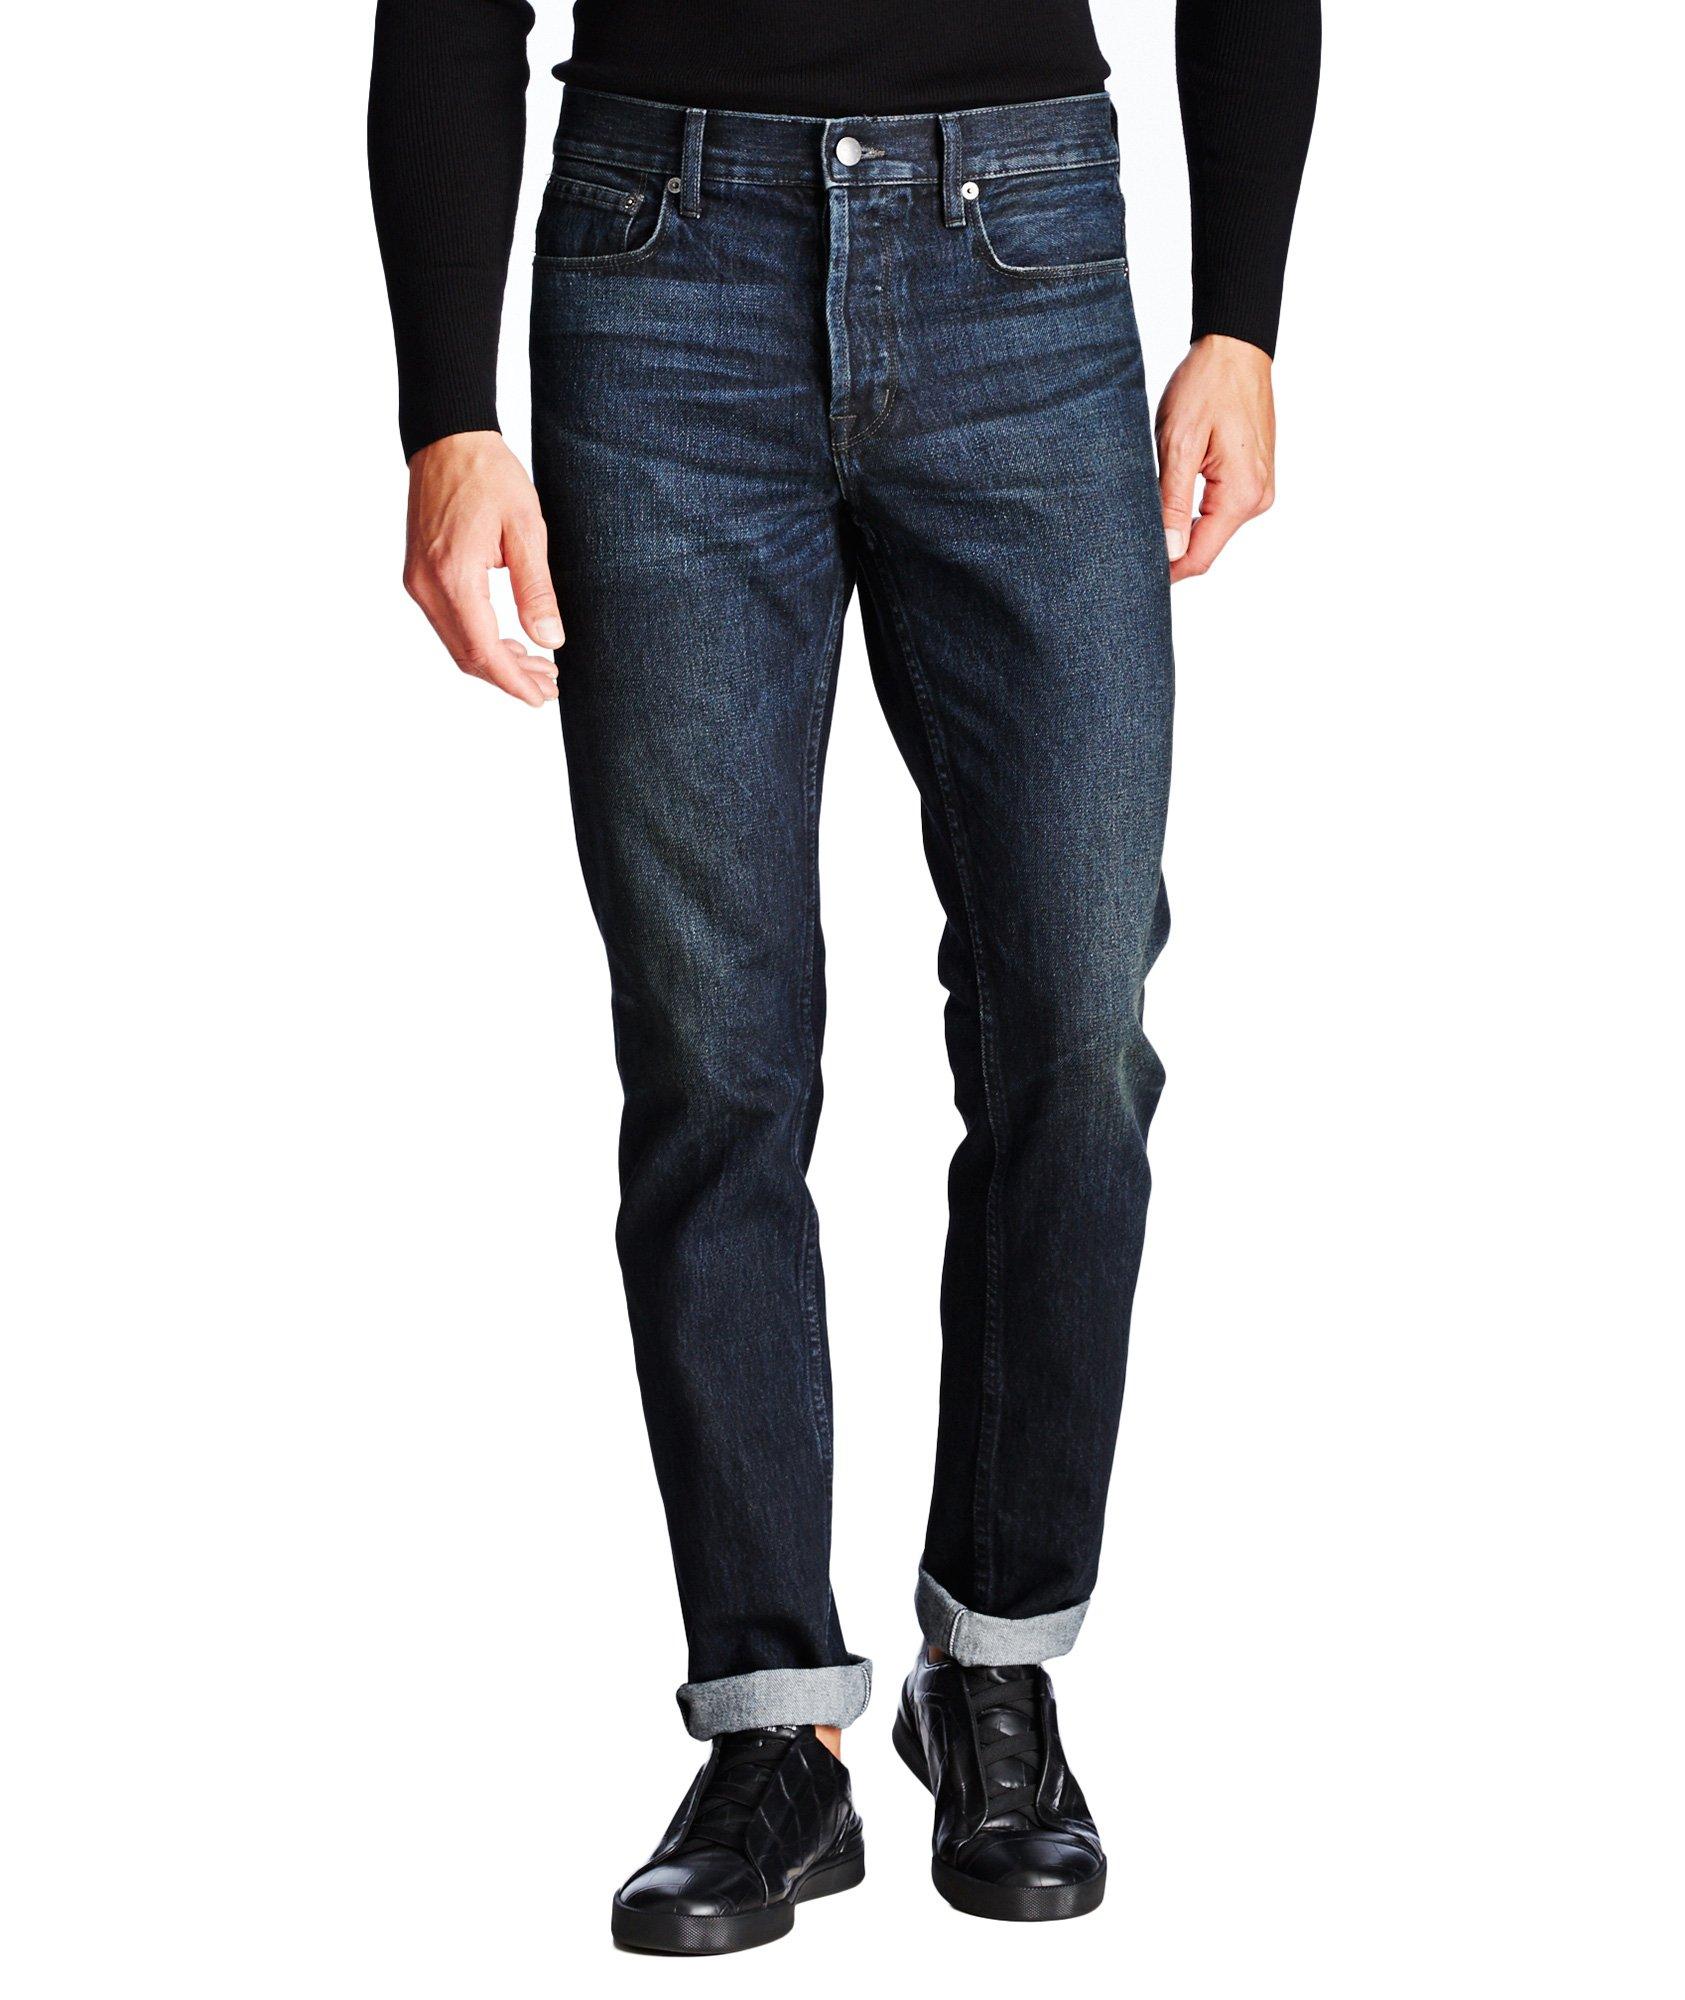 Straight Fit Tar Sand Jeans image 0